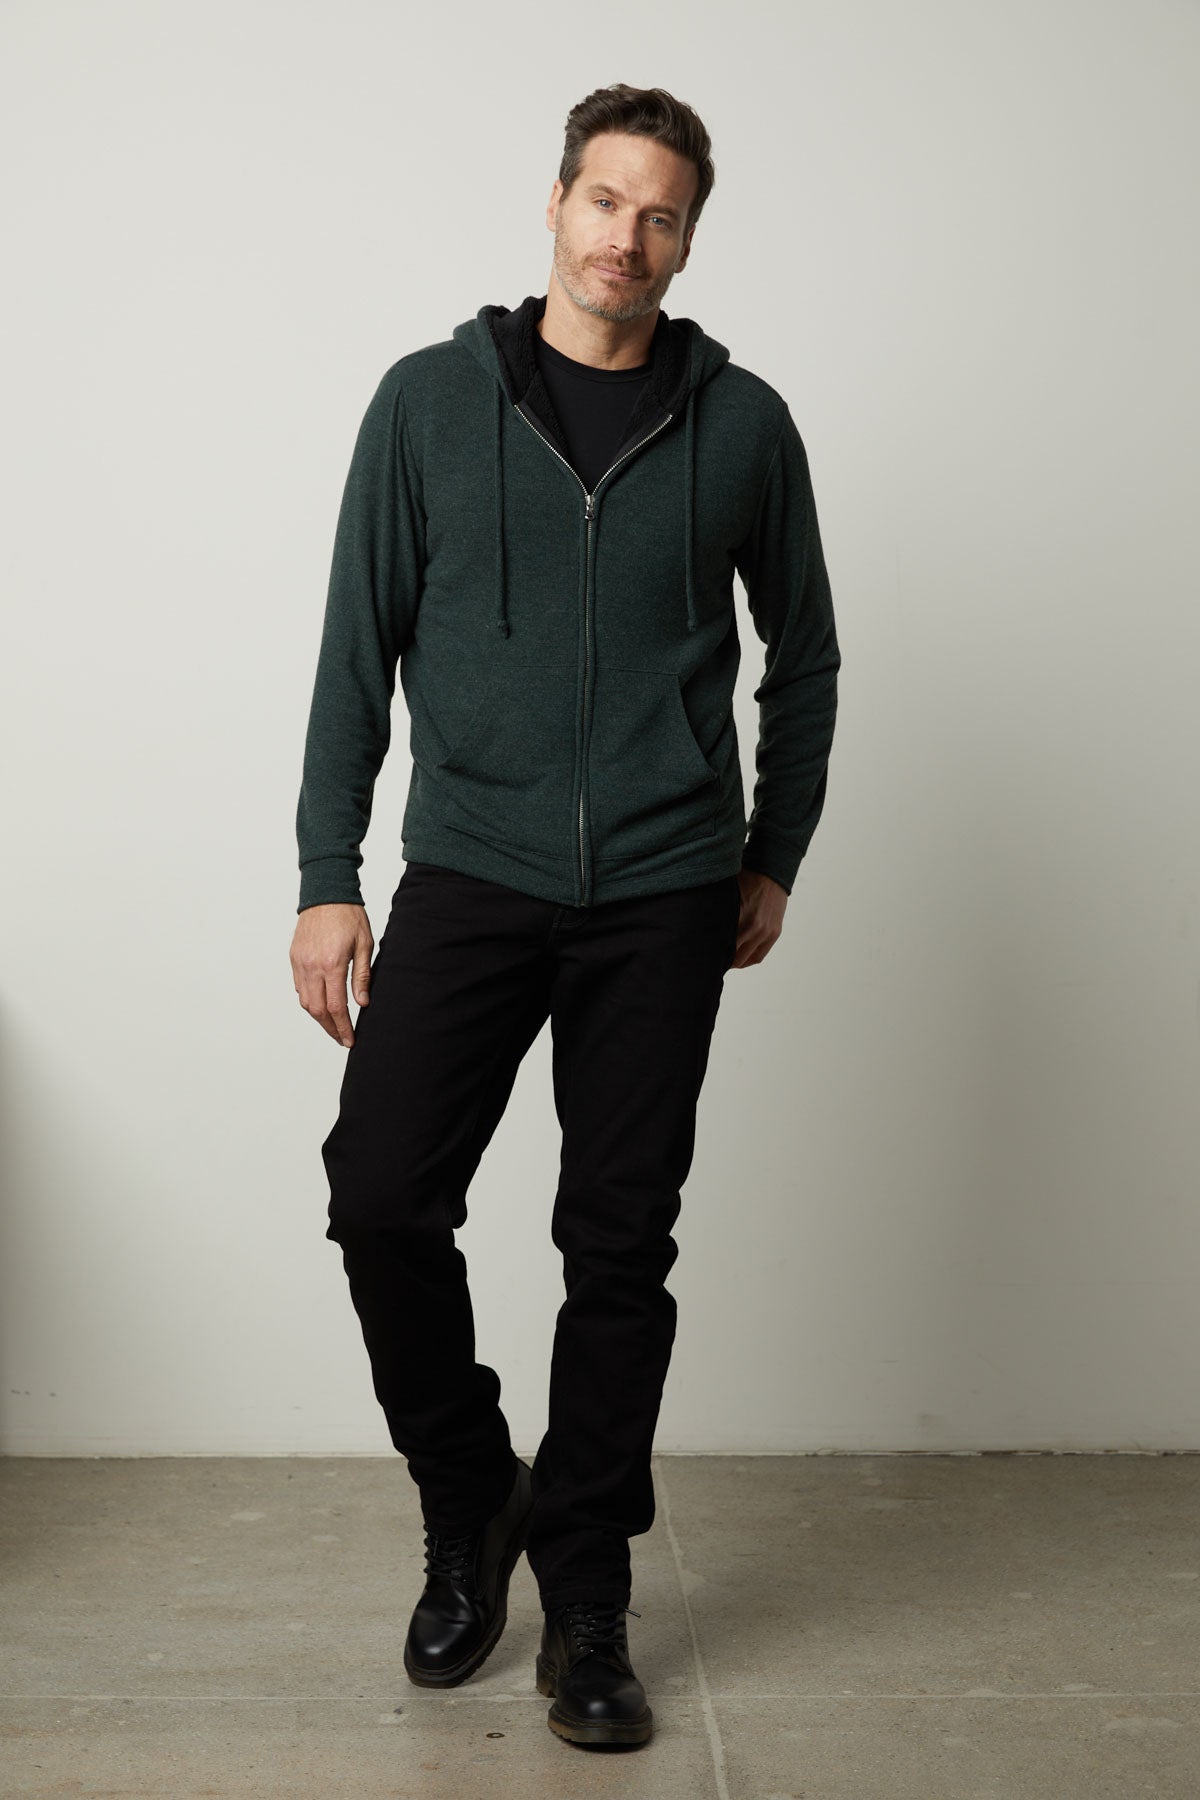 A man wearing a Velvet by Graham & Spencer SALVADORE SHERPA LINED HOODIE with an adjustable drawstring hood and black pants.-35605834072257